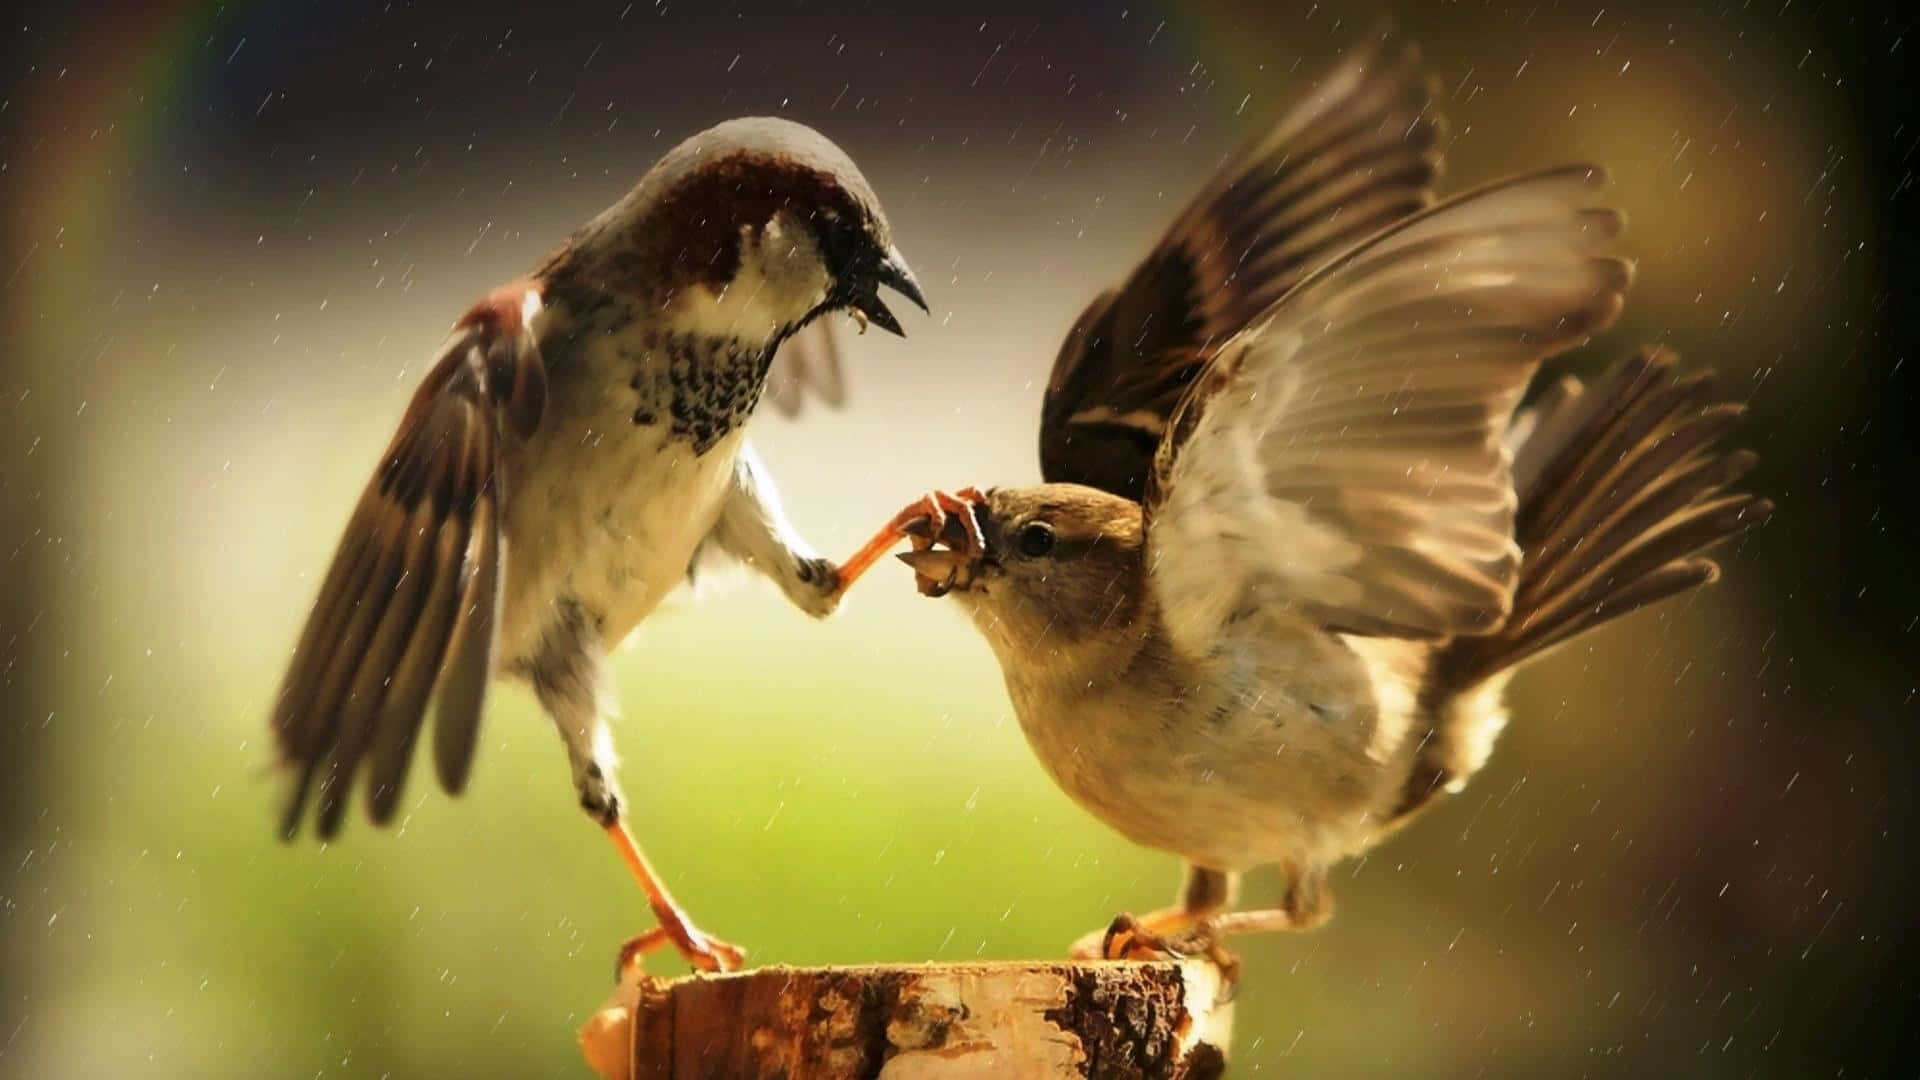 Two Birds Are Fighting Over A Piece Of Wood